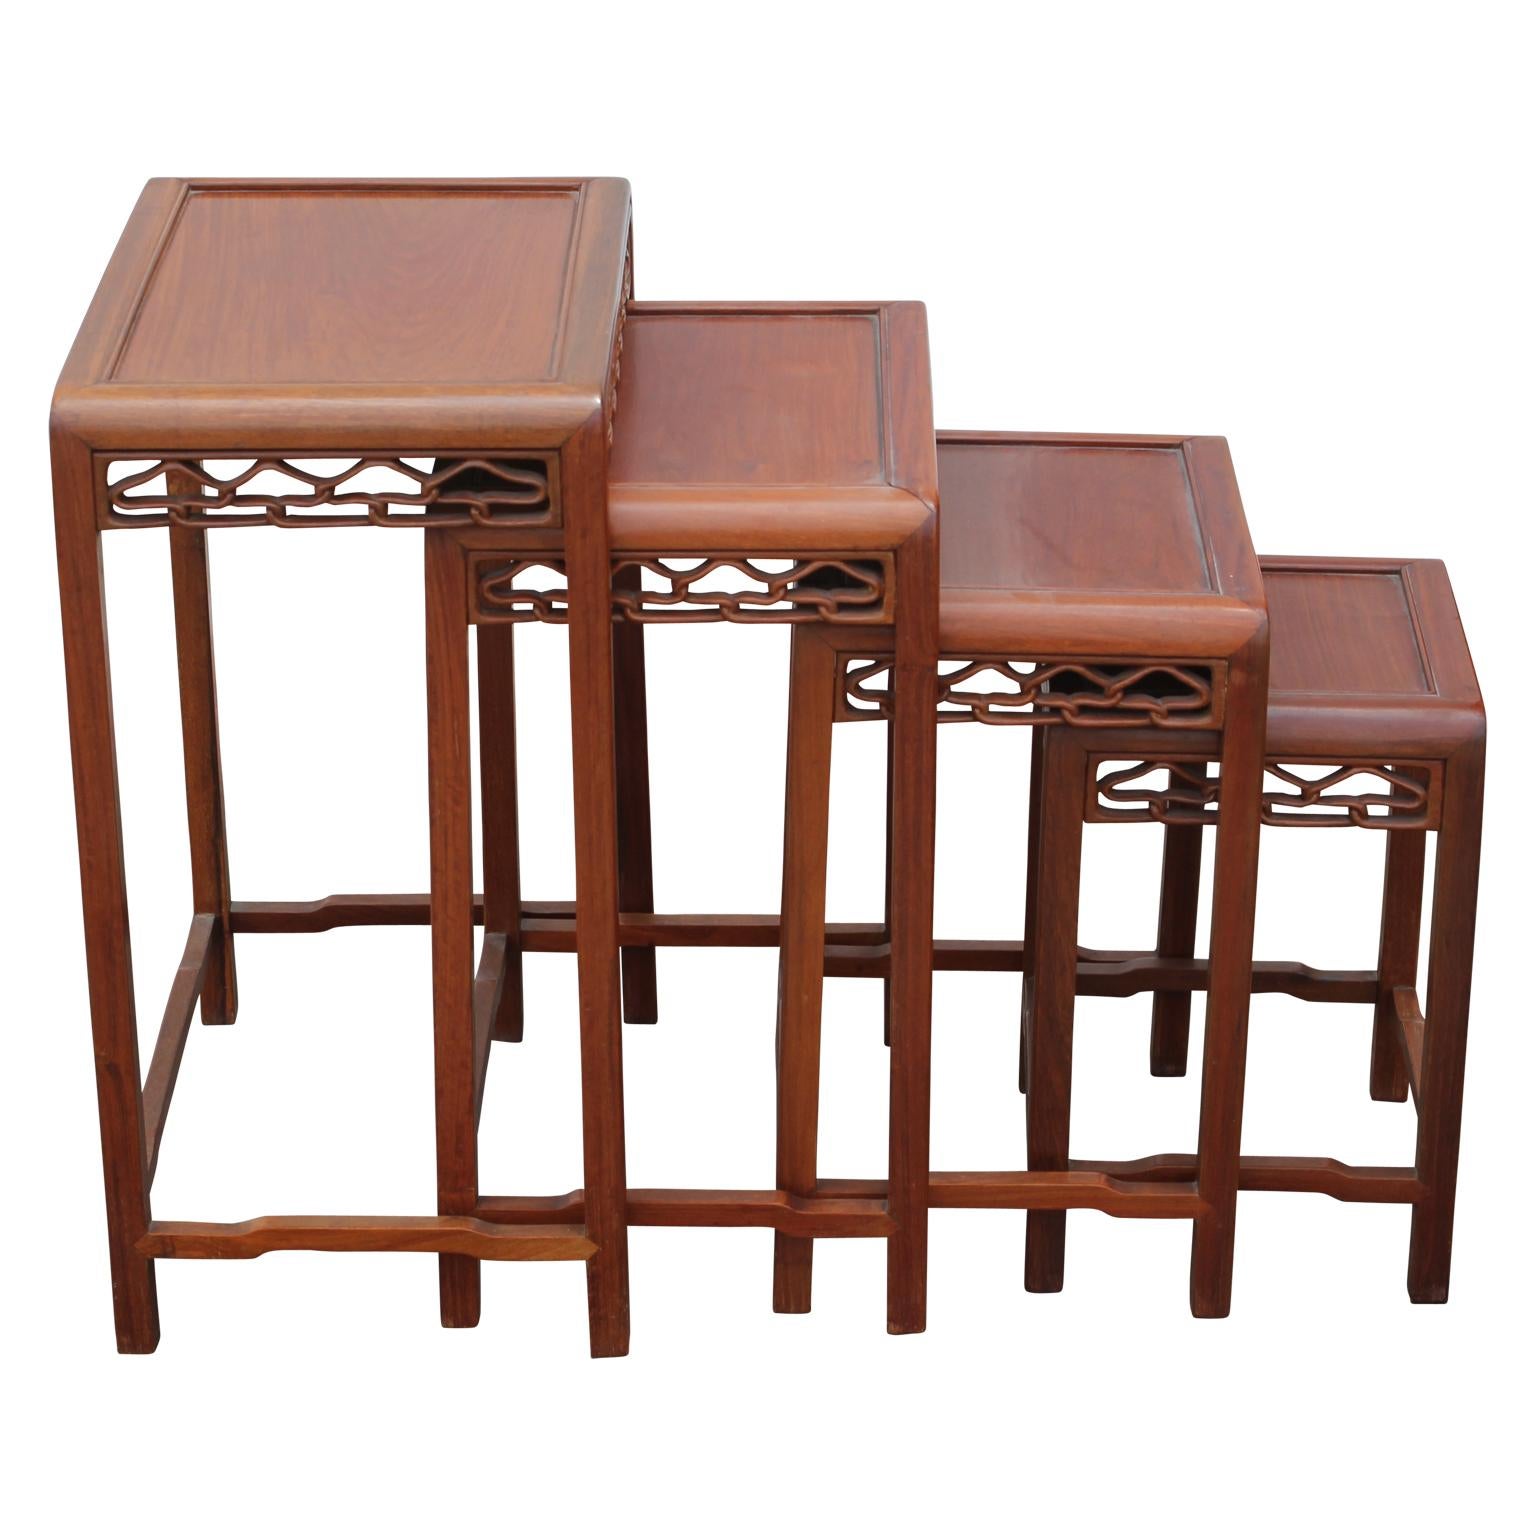 Beautiful 20th century carved nesting tables. They are Chinese in origin and are made from a stunning camphor wood. The tables feature carvings on the sides attached to the table tops. The tables can be placed separately or stacked